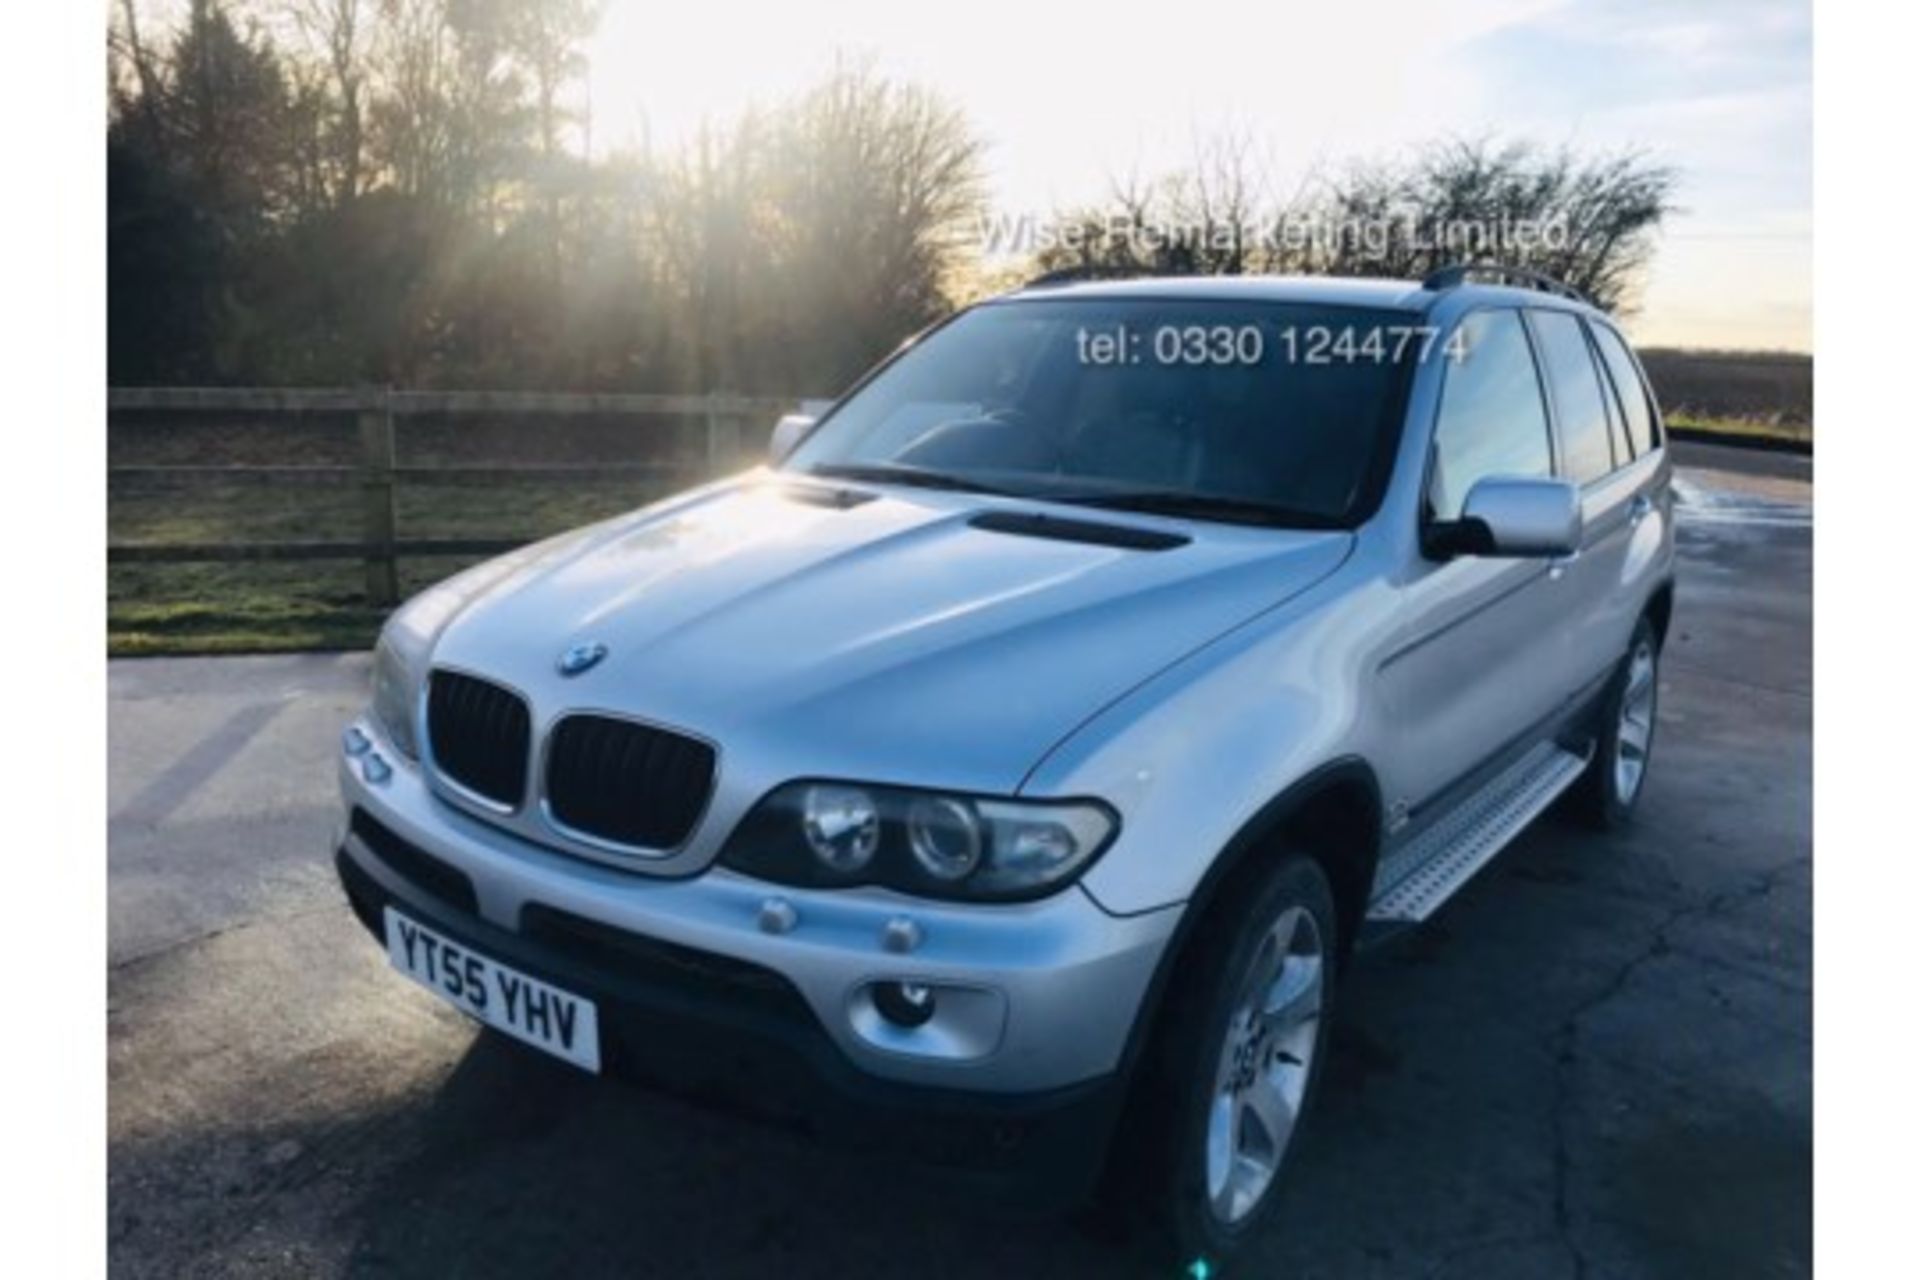 BMW X5 Sport 3.0d Auto - 2006 Model - Full Leather - Heated Seats - Fully Loaded